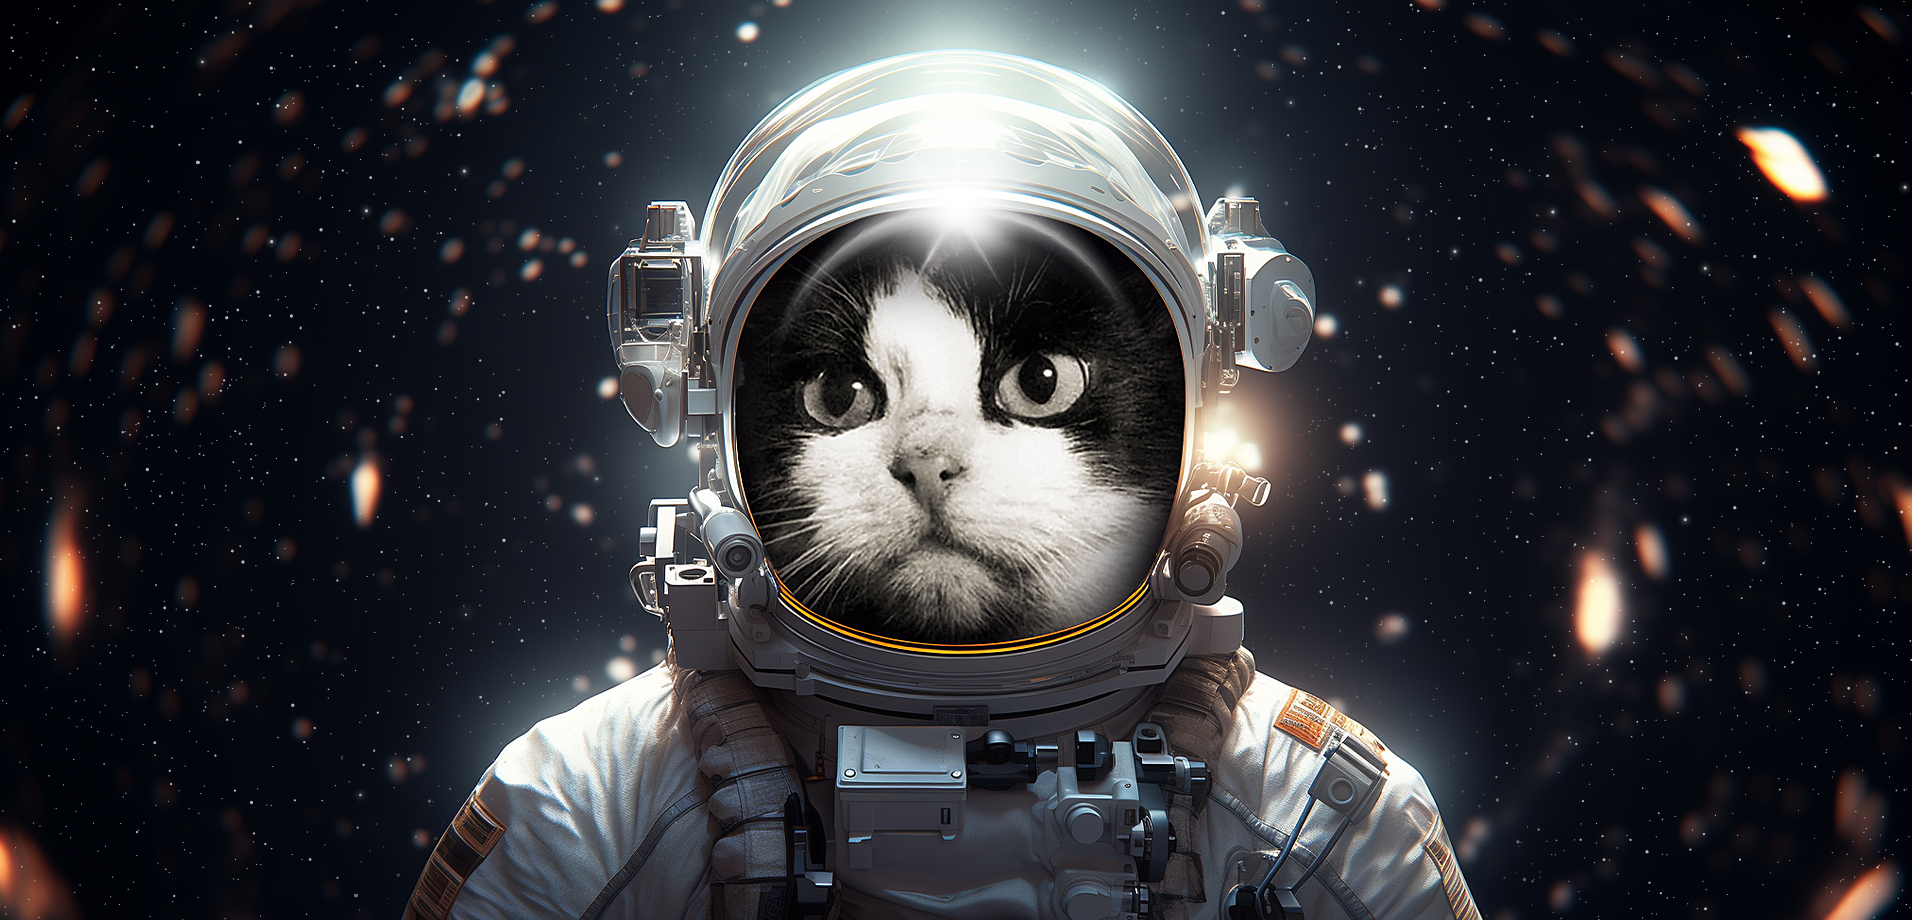 The First and Last Cat in Space: Cat Astronaut Félicette